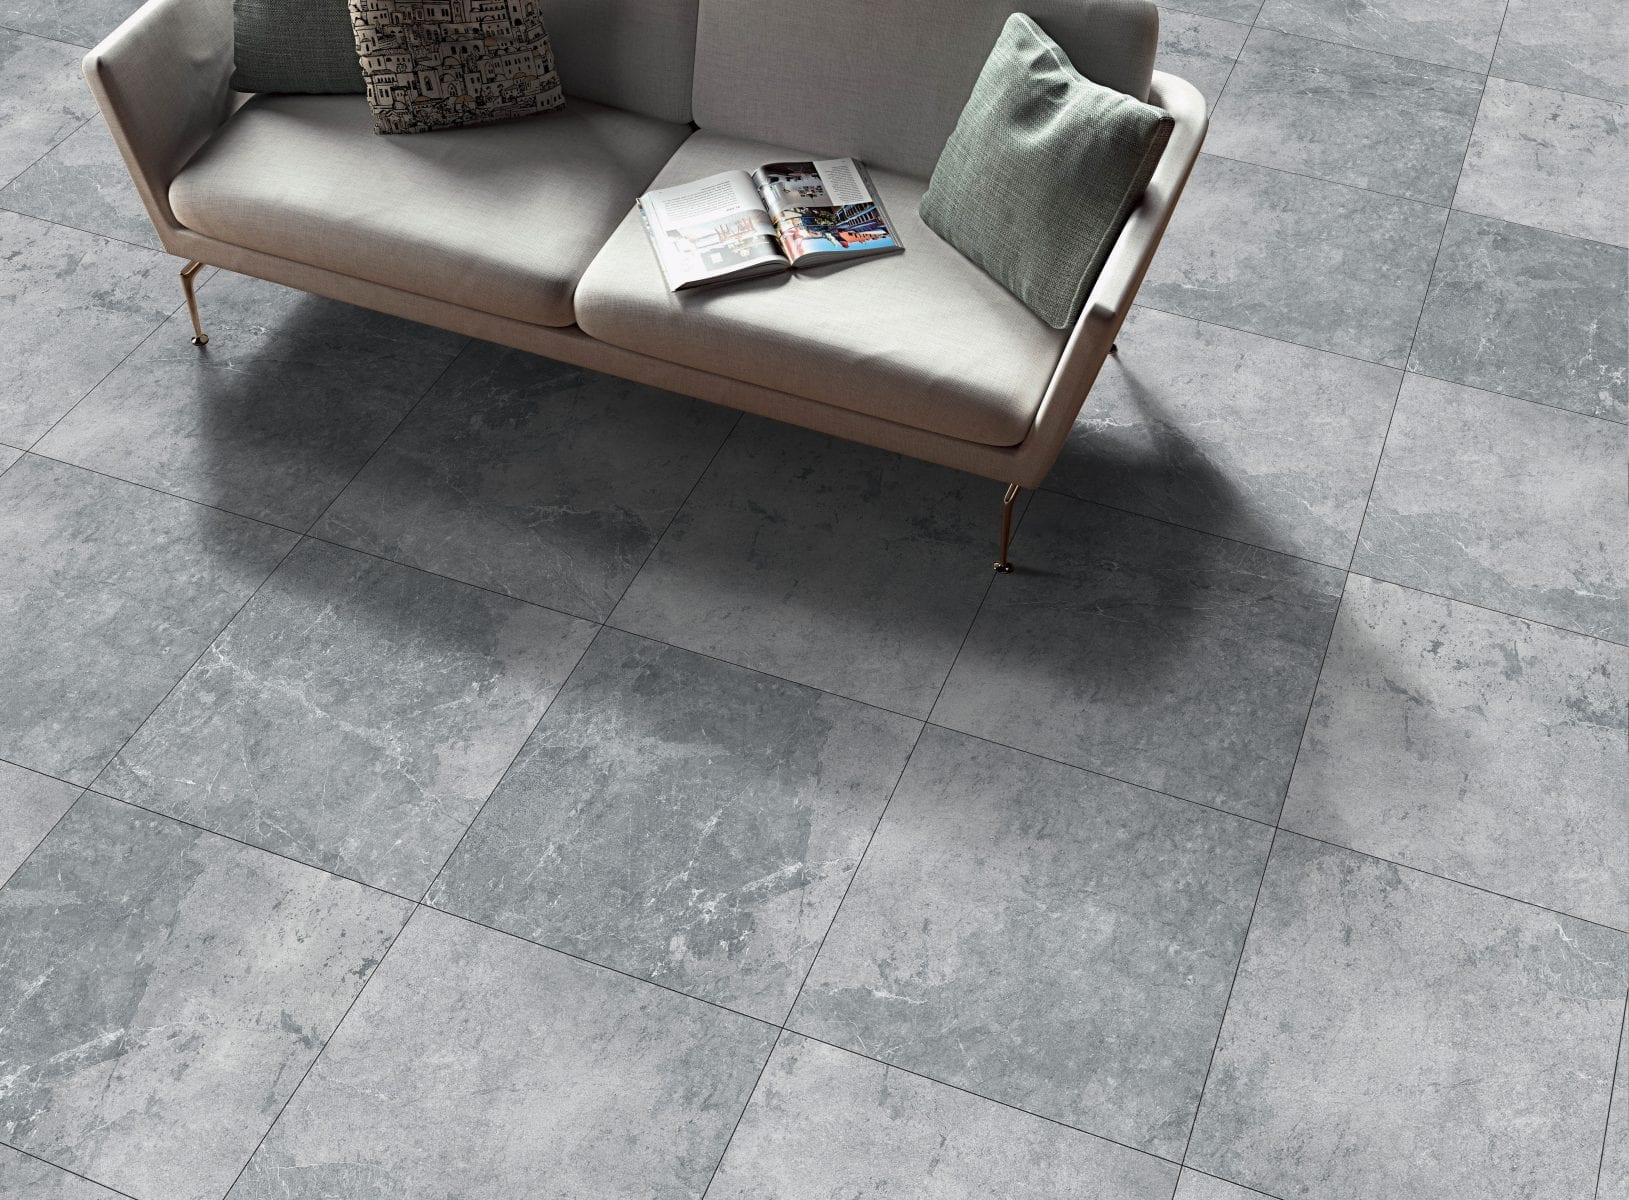 How Much Does Tile Flooring Cost? - Cheap Tiles Online